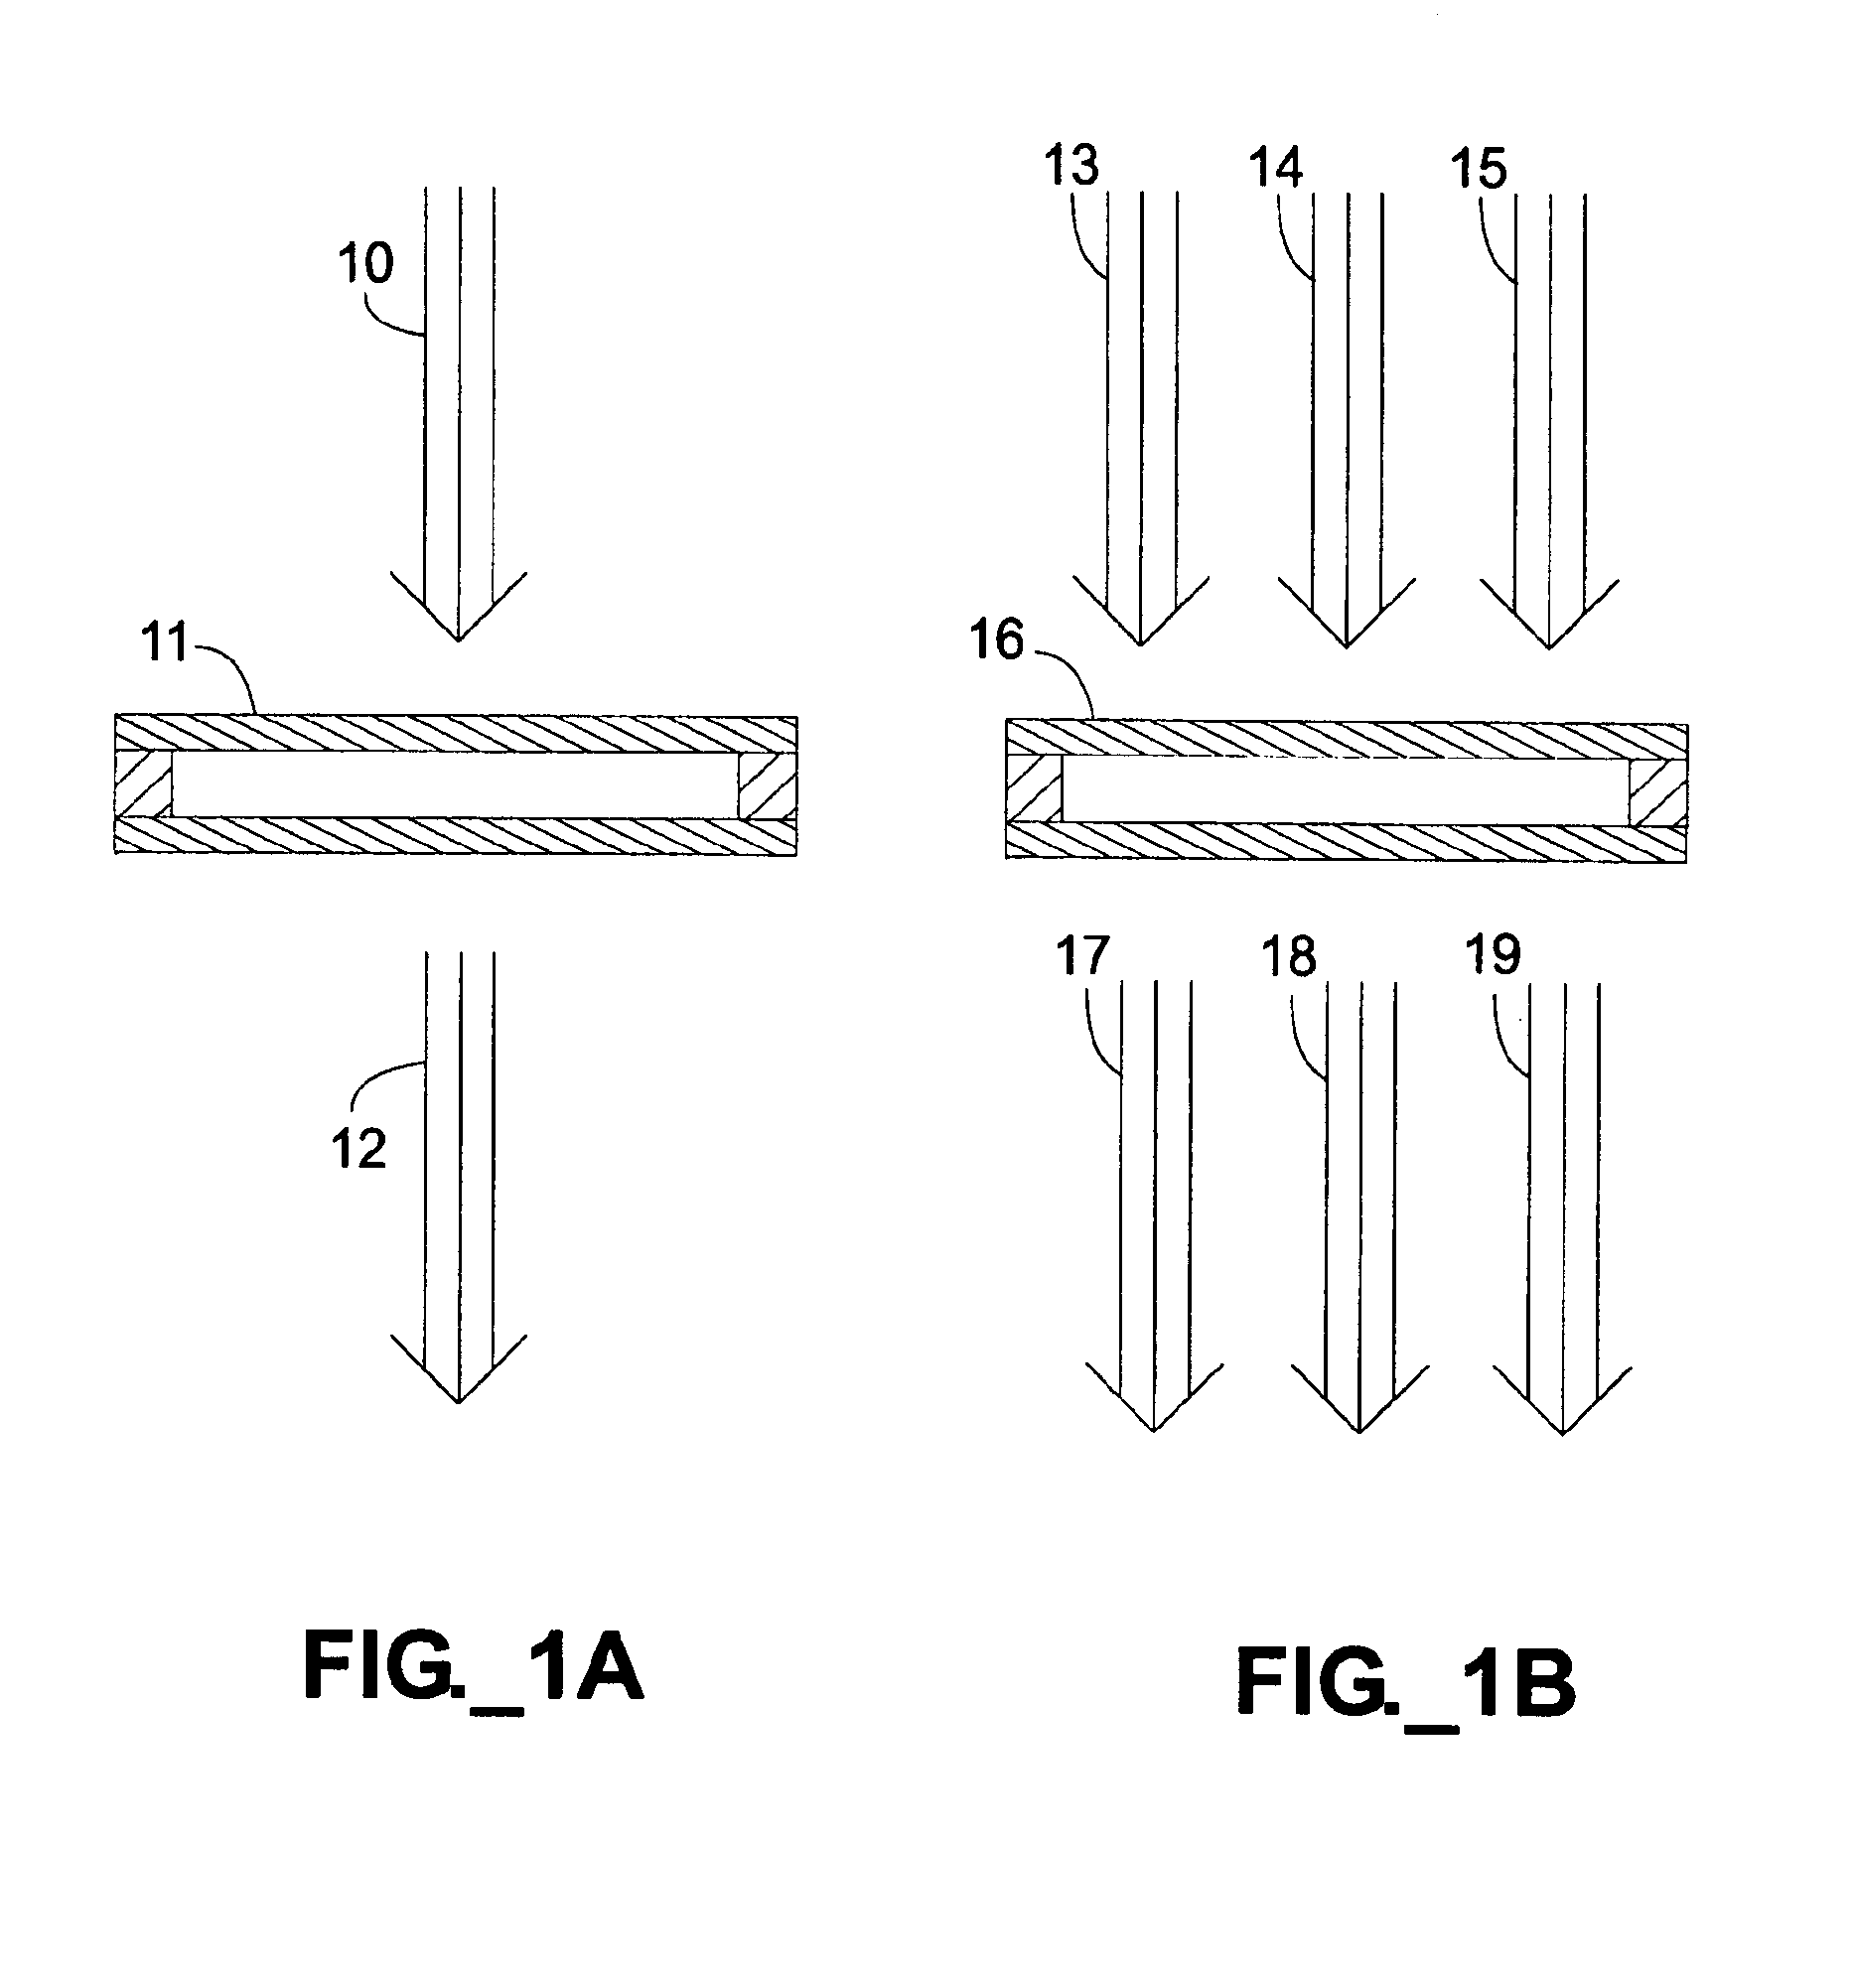 Optical devices with fluidic systems